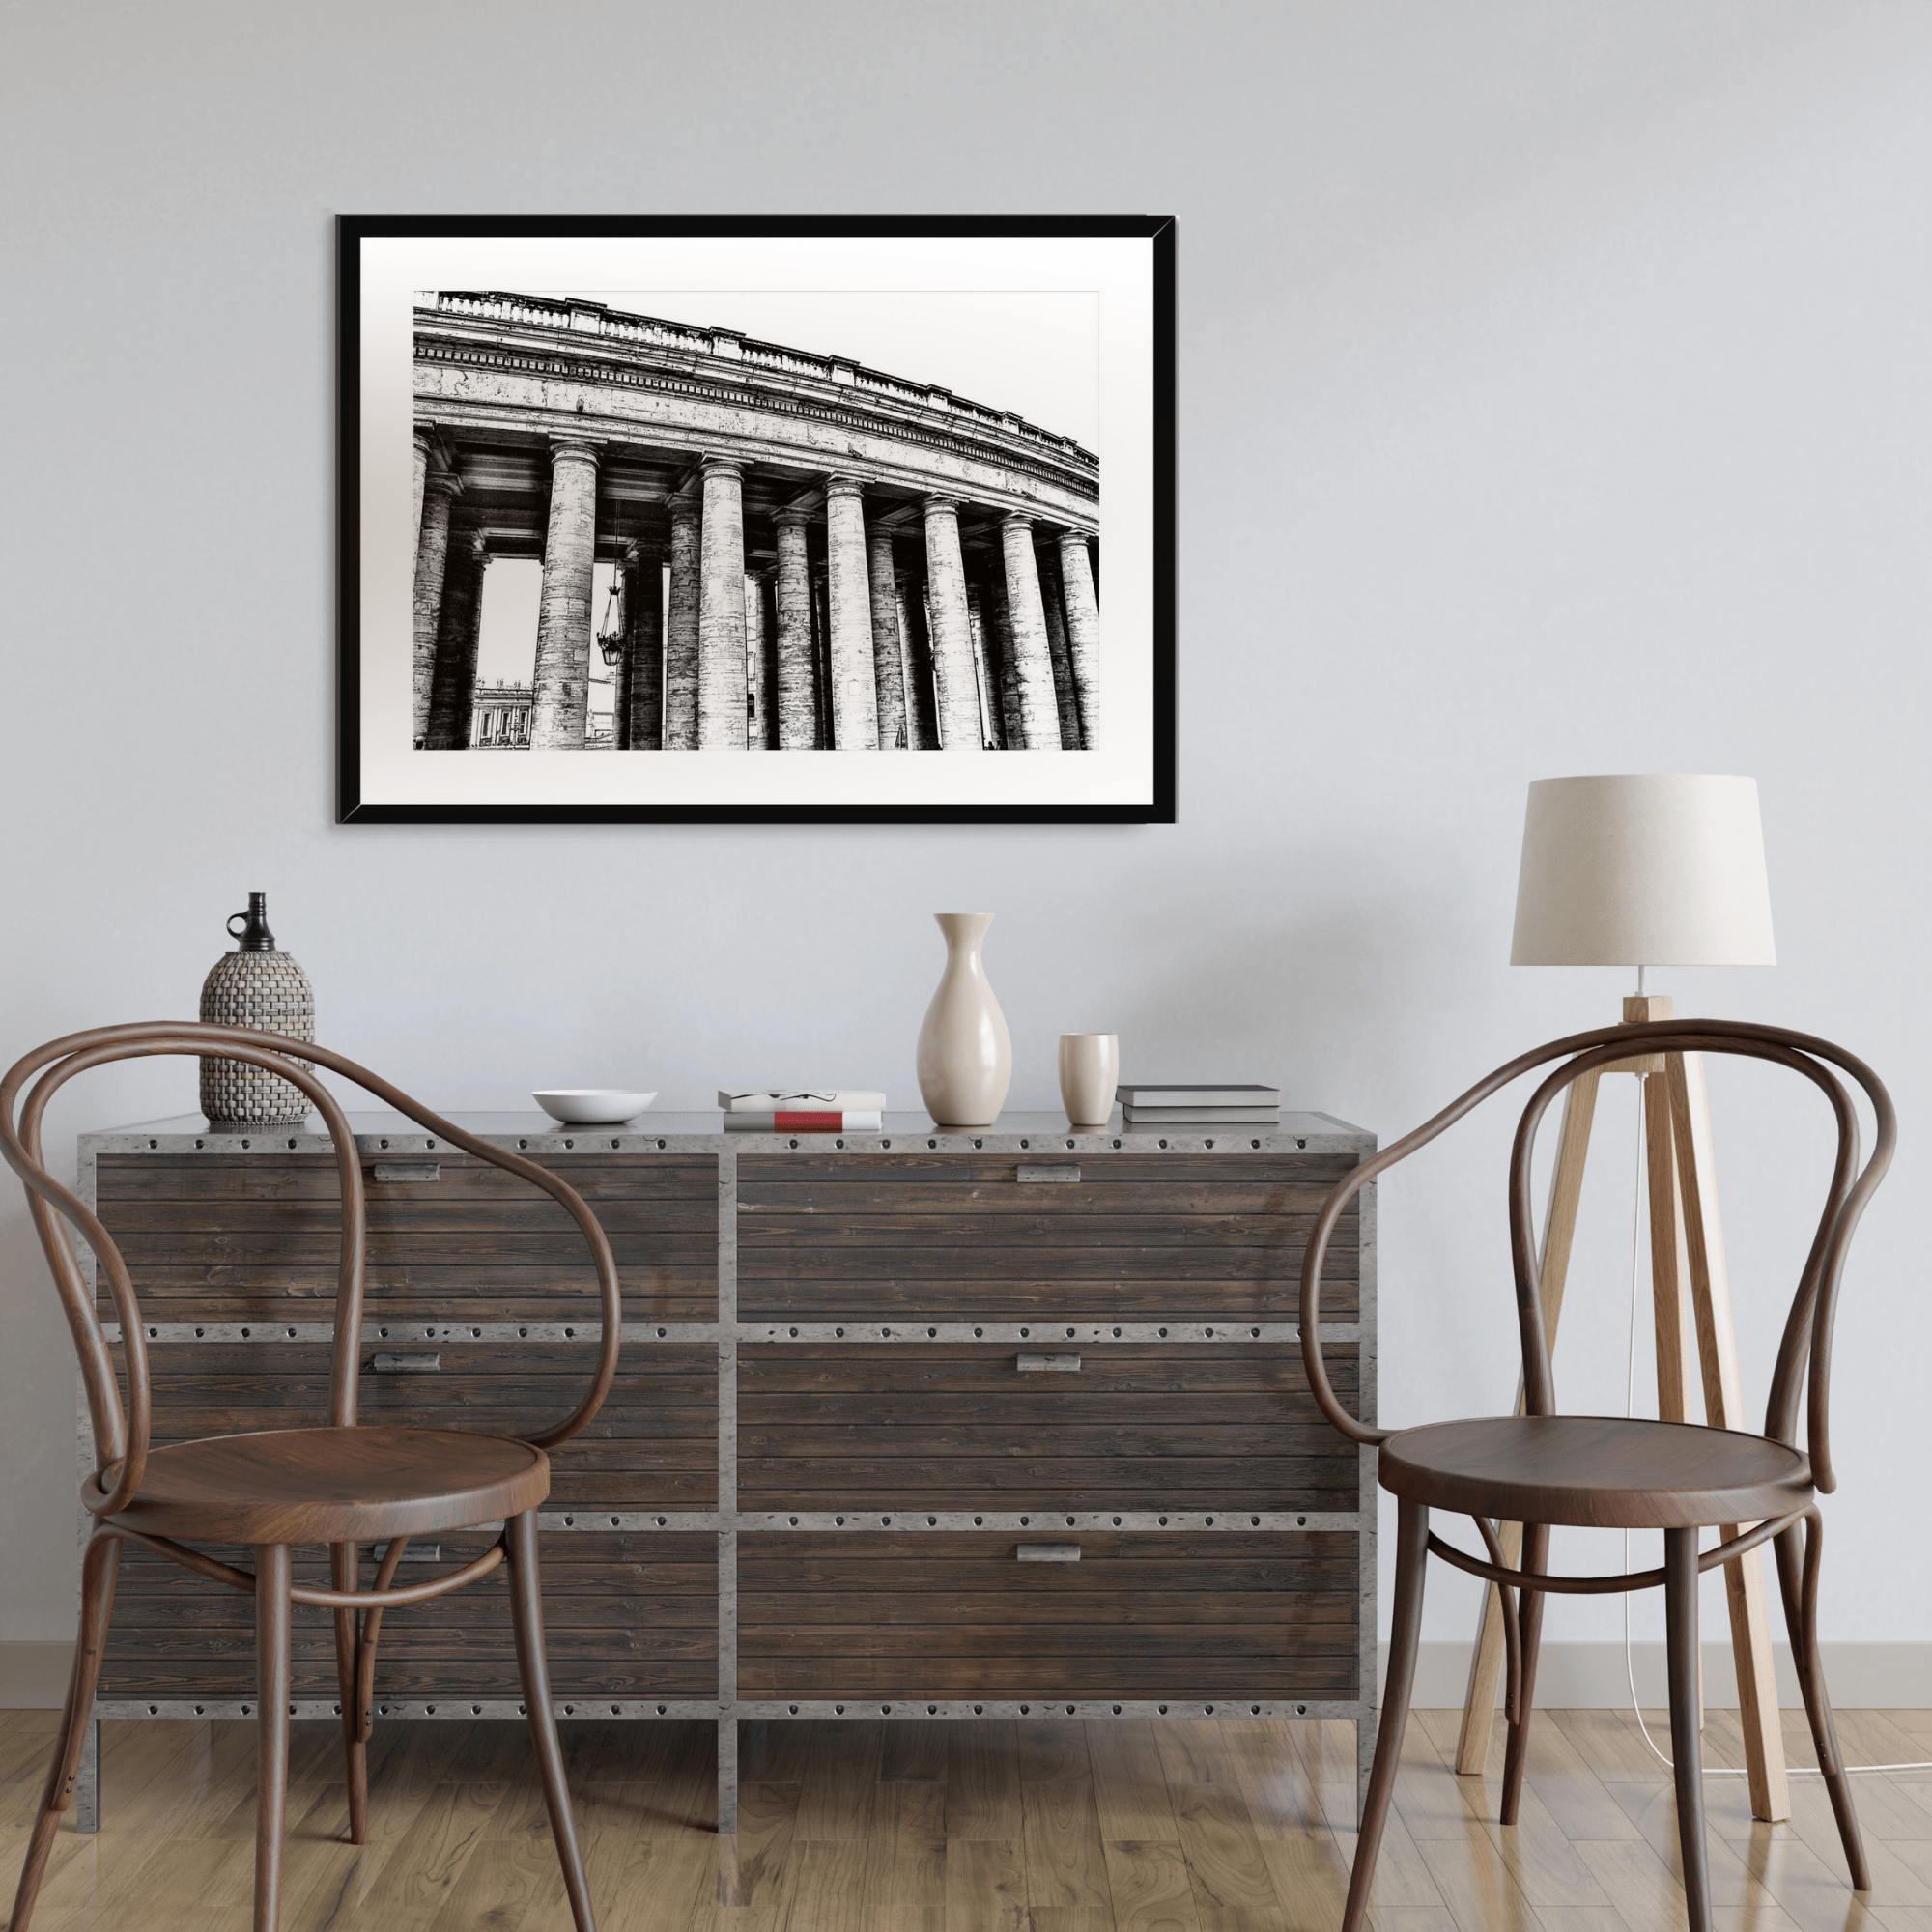 Seek & Ramble Framed The Colonnades of St. Peter's The Vatican Framed & Mounted Print